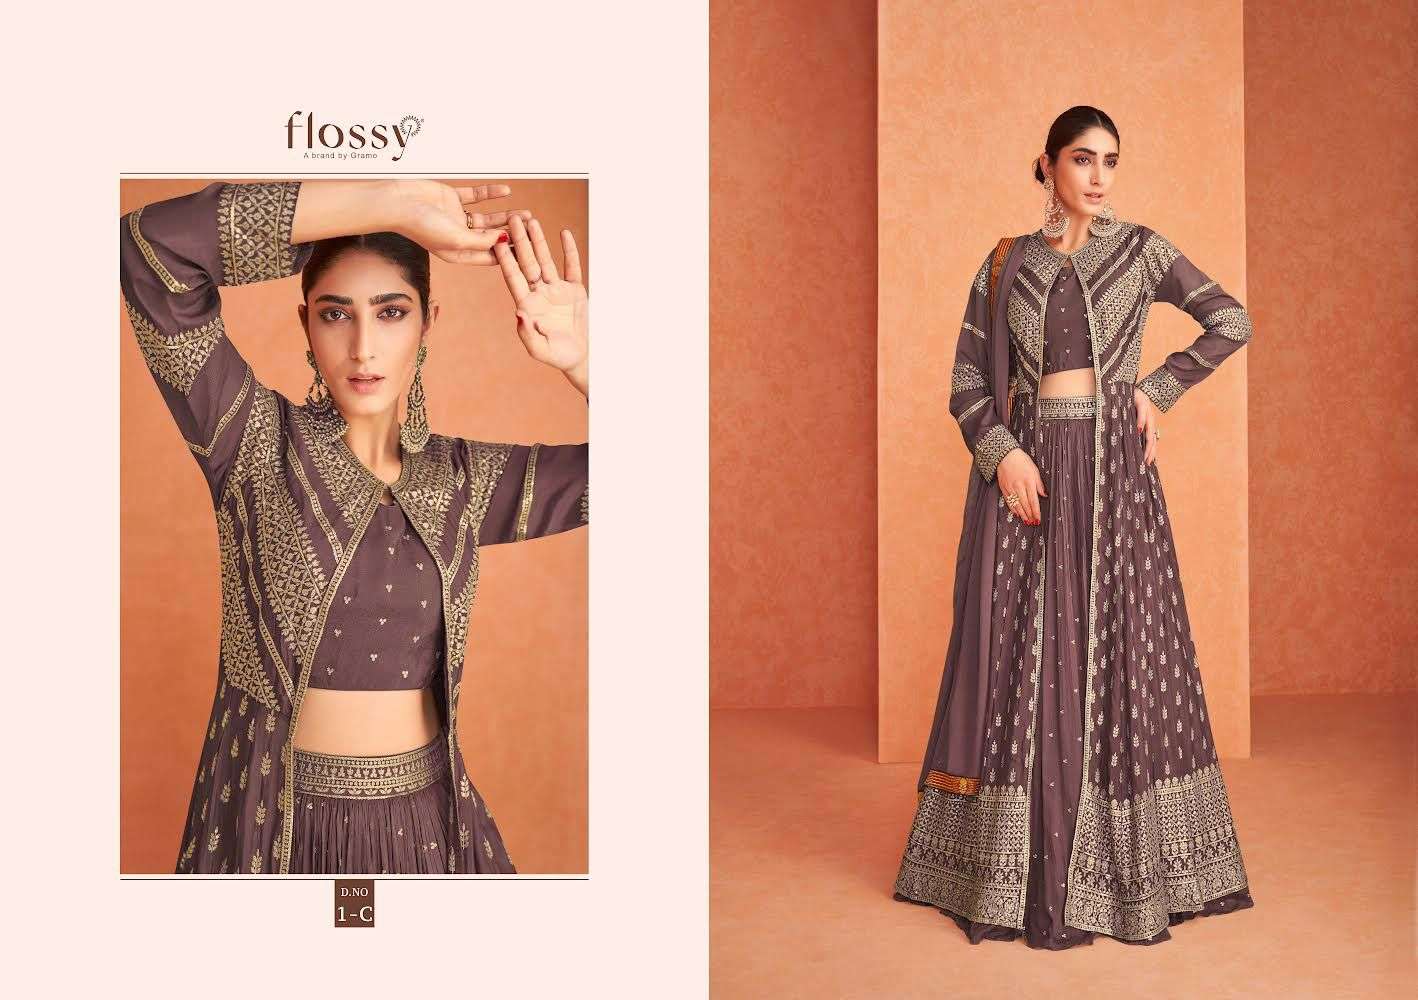 Naksh Colour Plus By Flossy 1-A To 1-D Series Beautiful Suits Colorful Stylish Fancy Casual Wear & Ethnic Wear Heavy Real Georgette Dresses At Wholesale Price